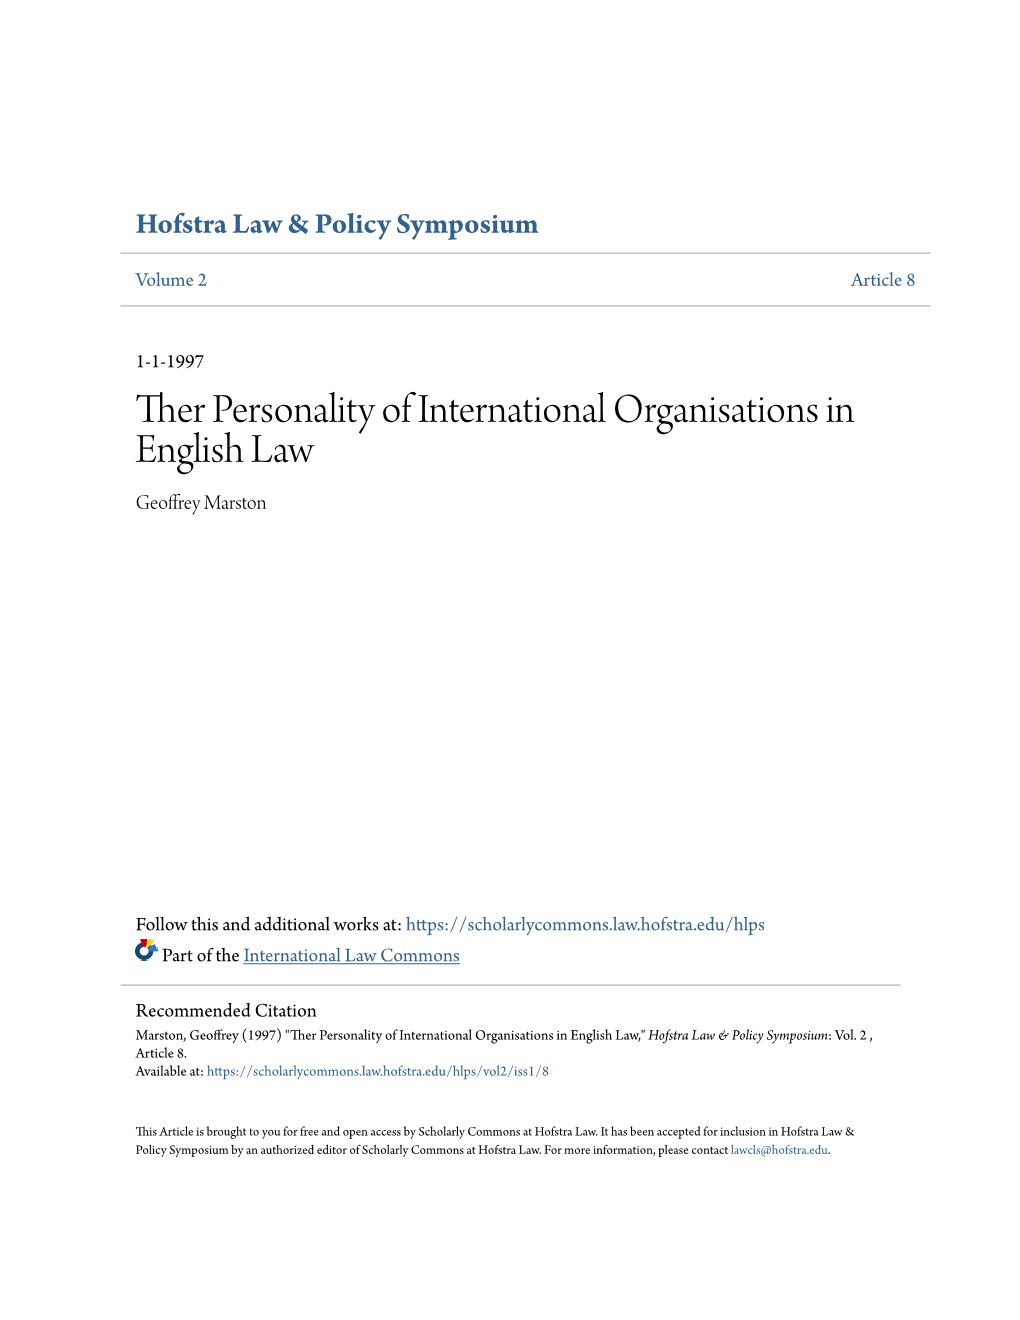 Ther Personality of International Organisations in English Law Geoffrey Marston